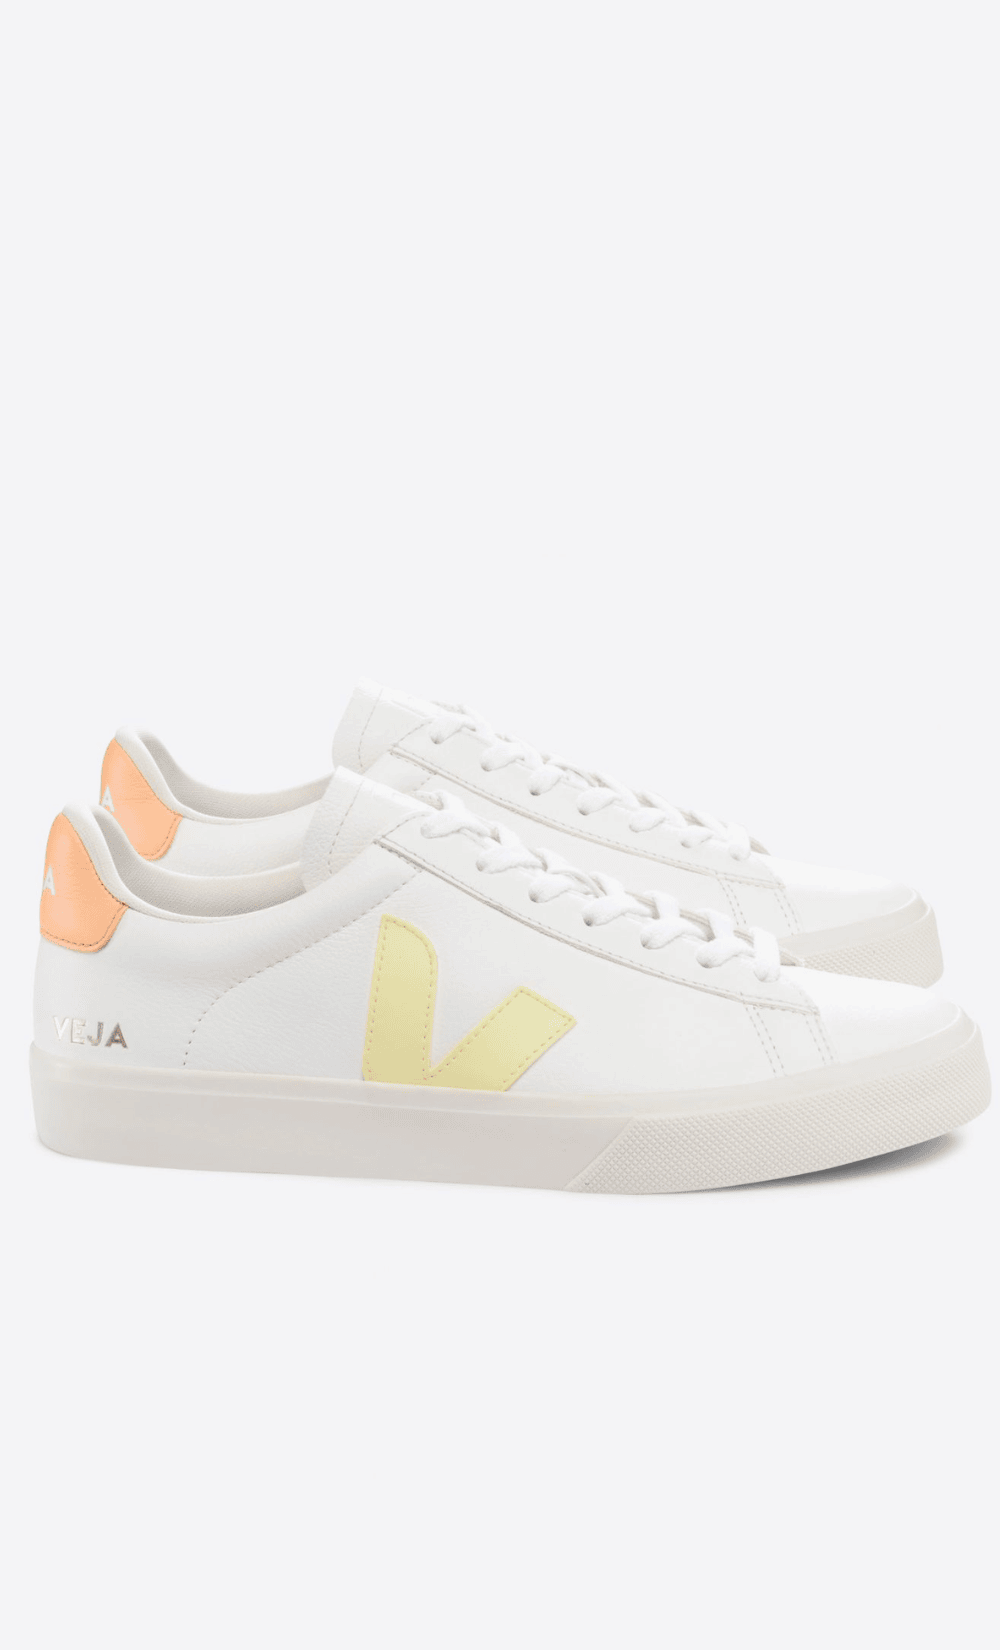 trinity-baskets-veja-campo-blanches-jaunes-peche-a-lacets